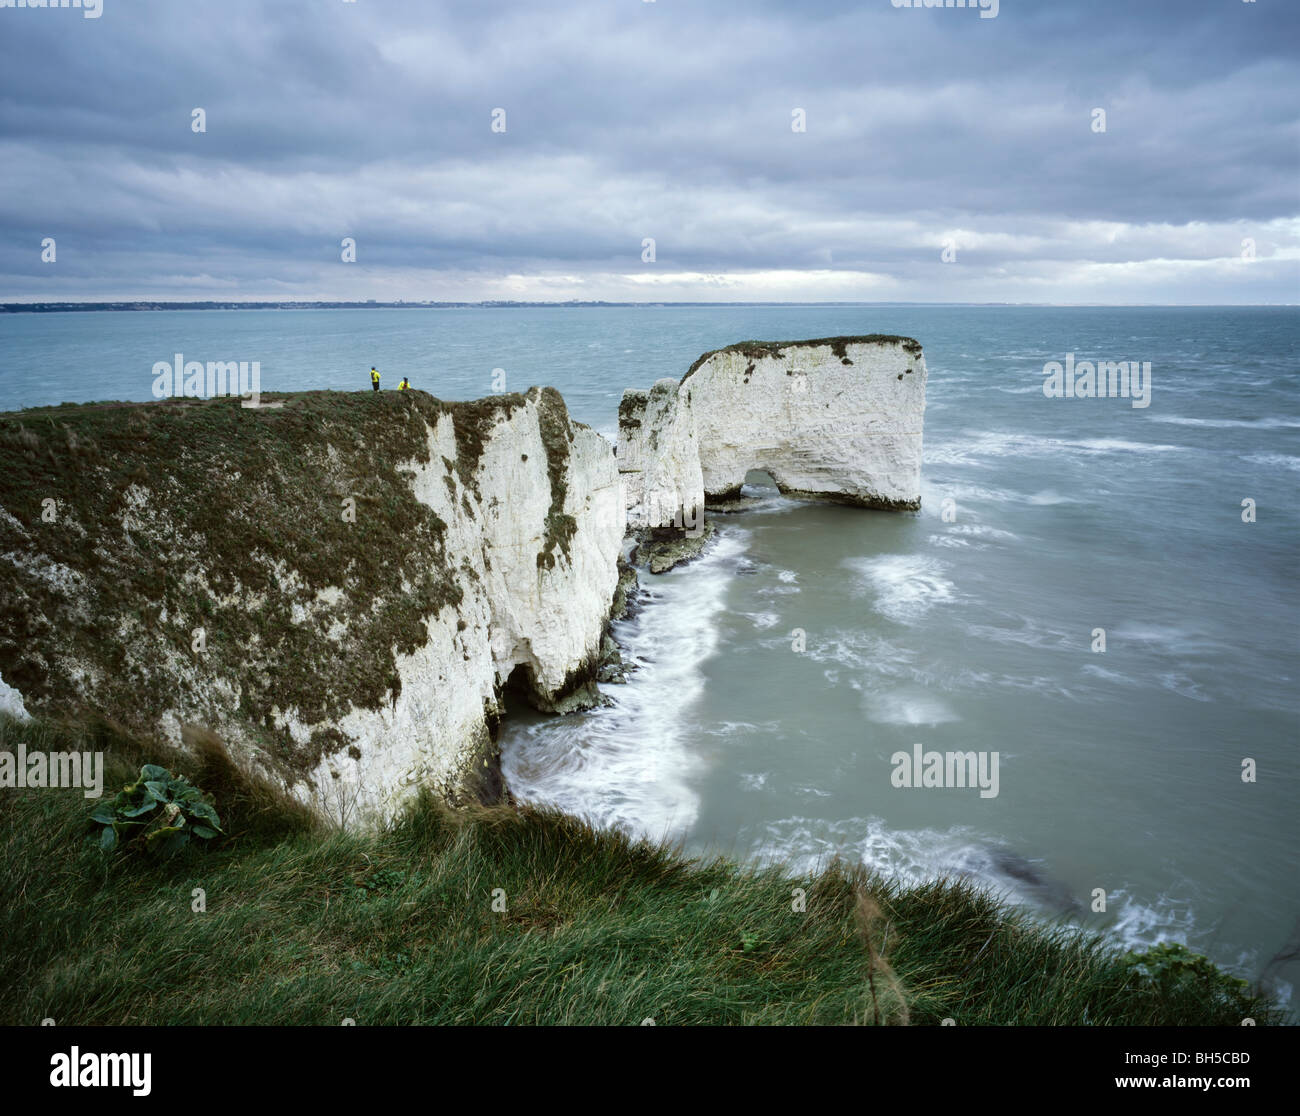 Classic view of Old Harry Rocks in Dorset on a cloudy day with 2 people near the edge of the rock giving an idea of the scale. Stock Photo